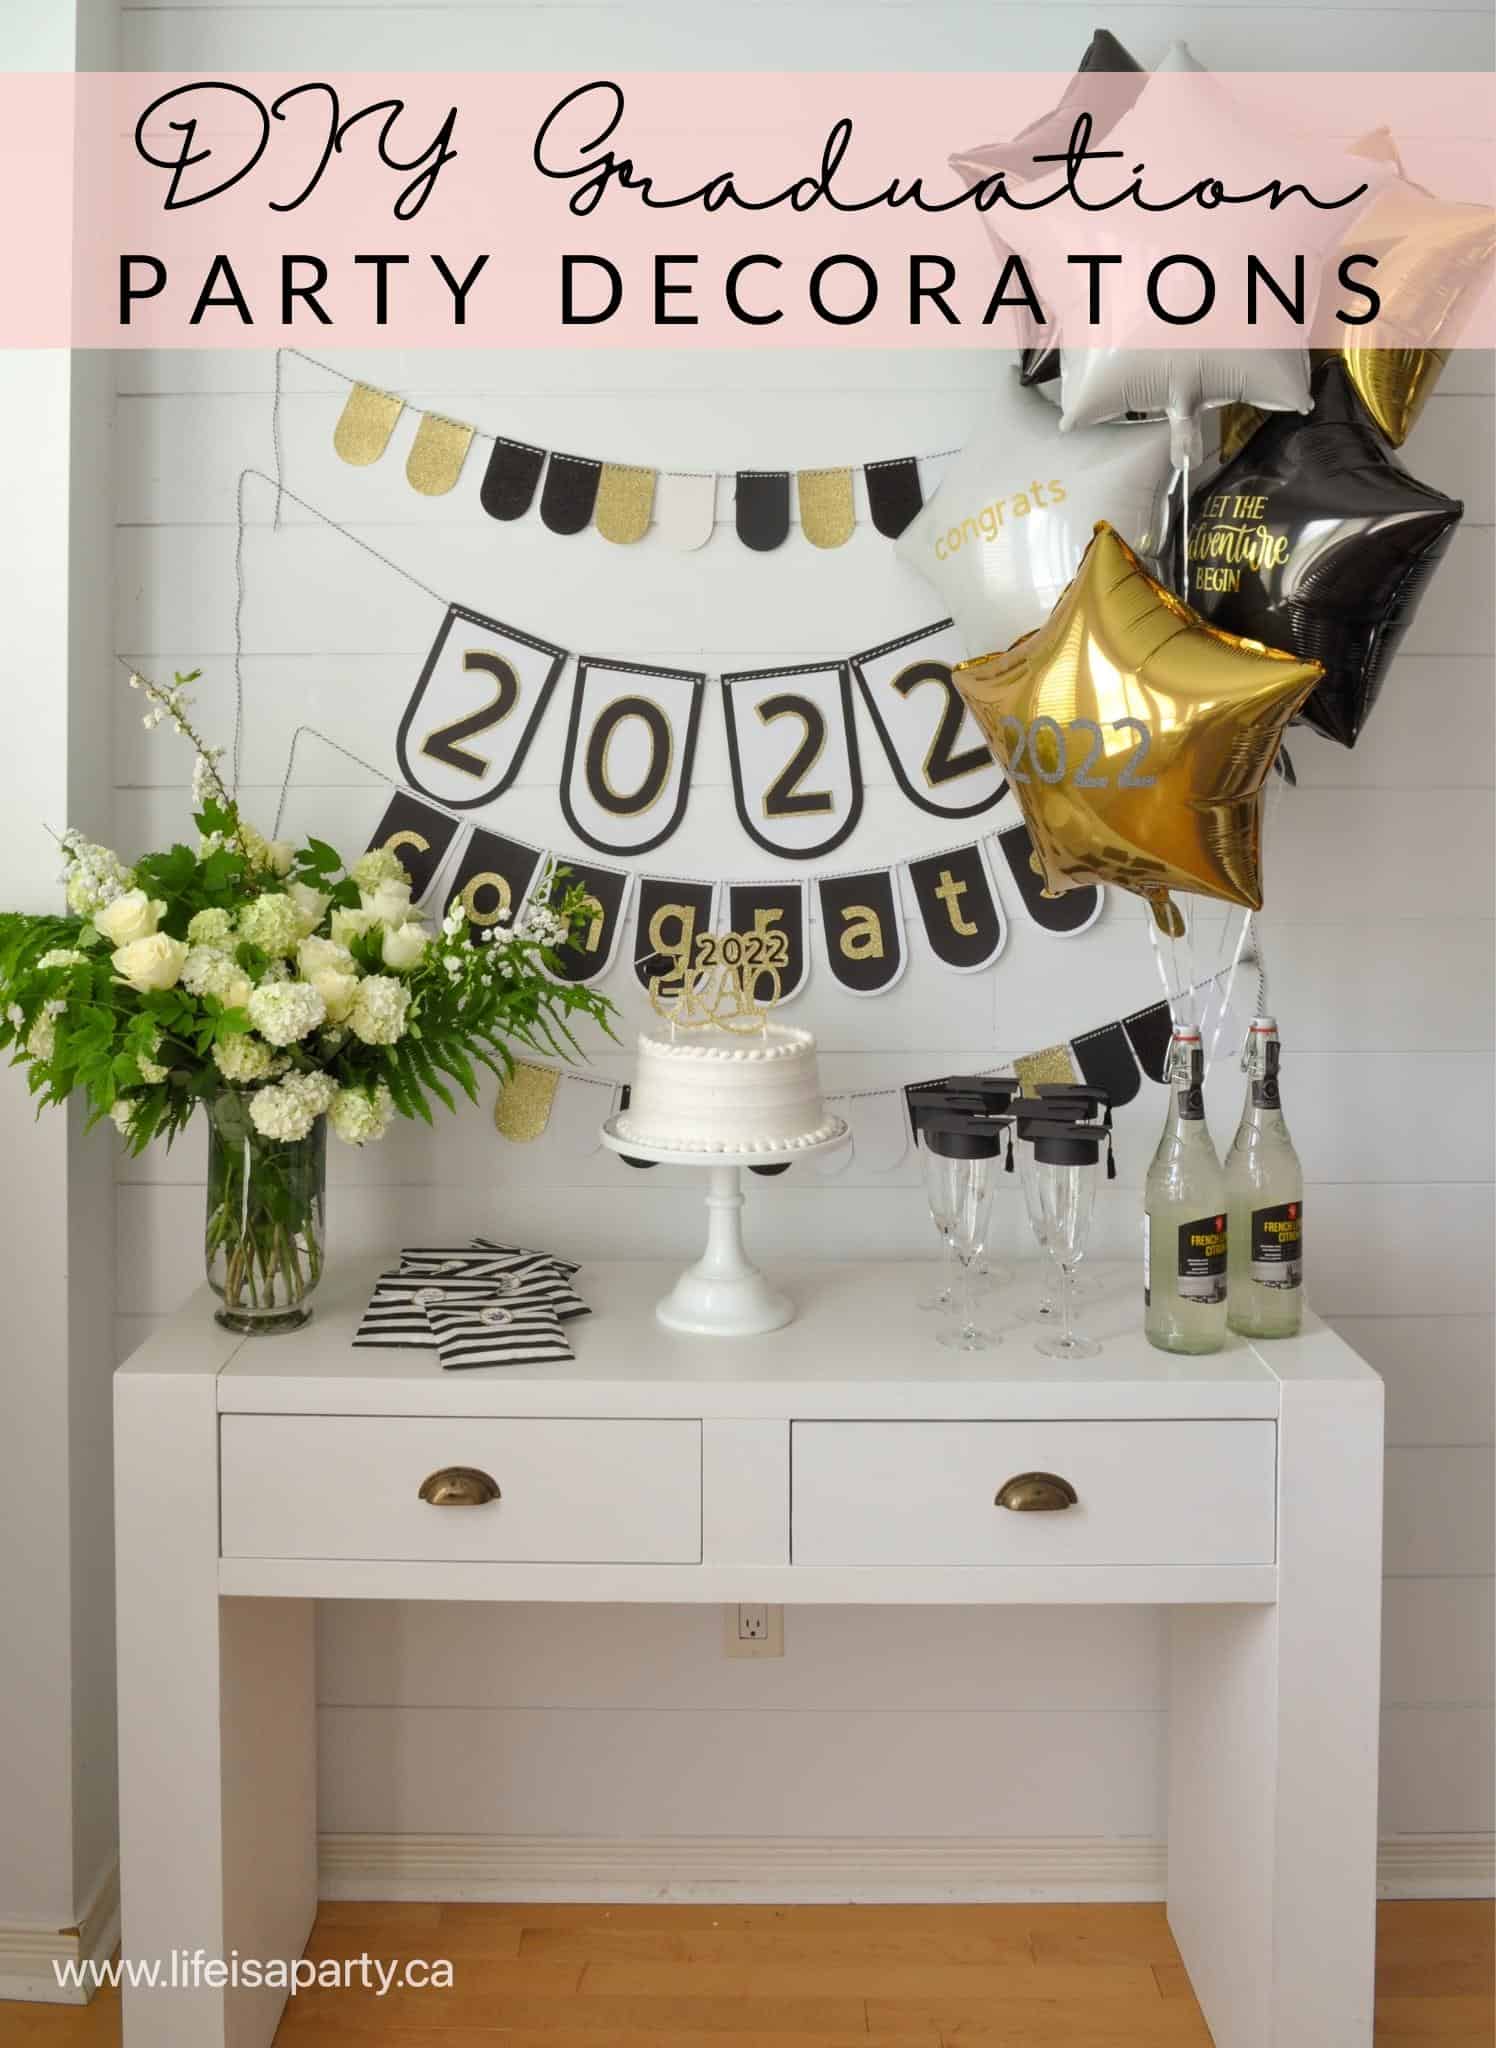  DIY Graduation Party Decorations: use your Cricut to create banners, custom stickers, a cake topper and balloon decals.